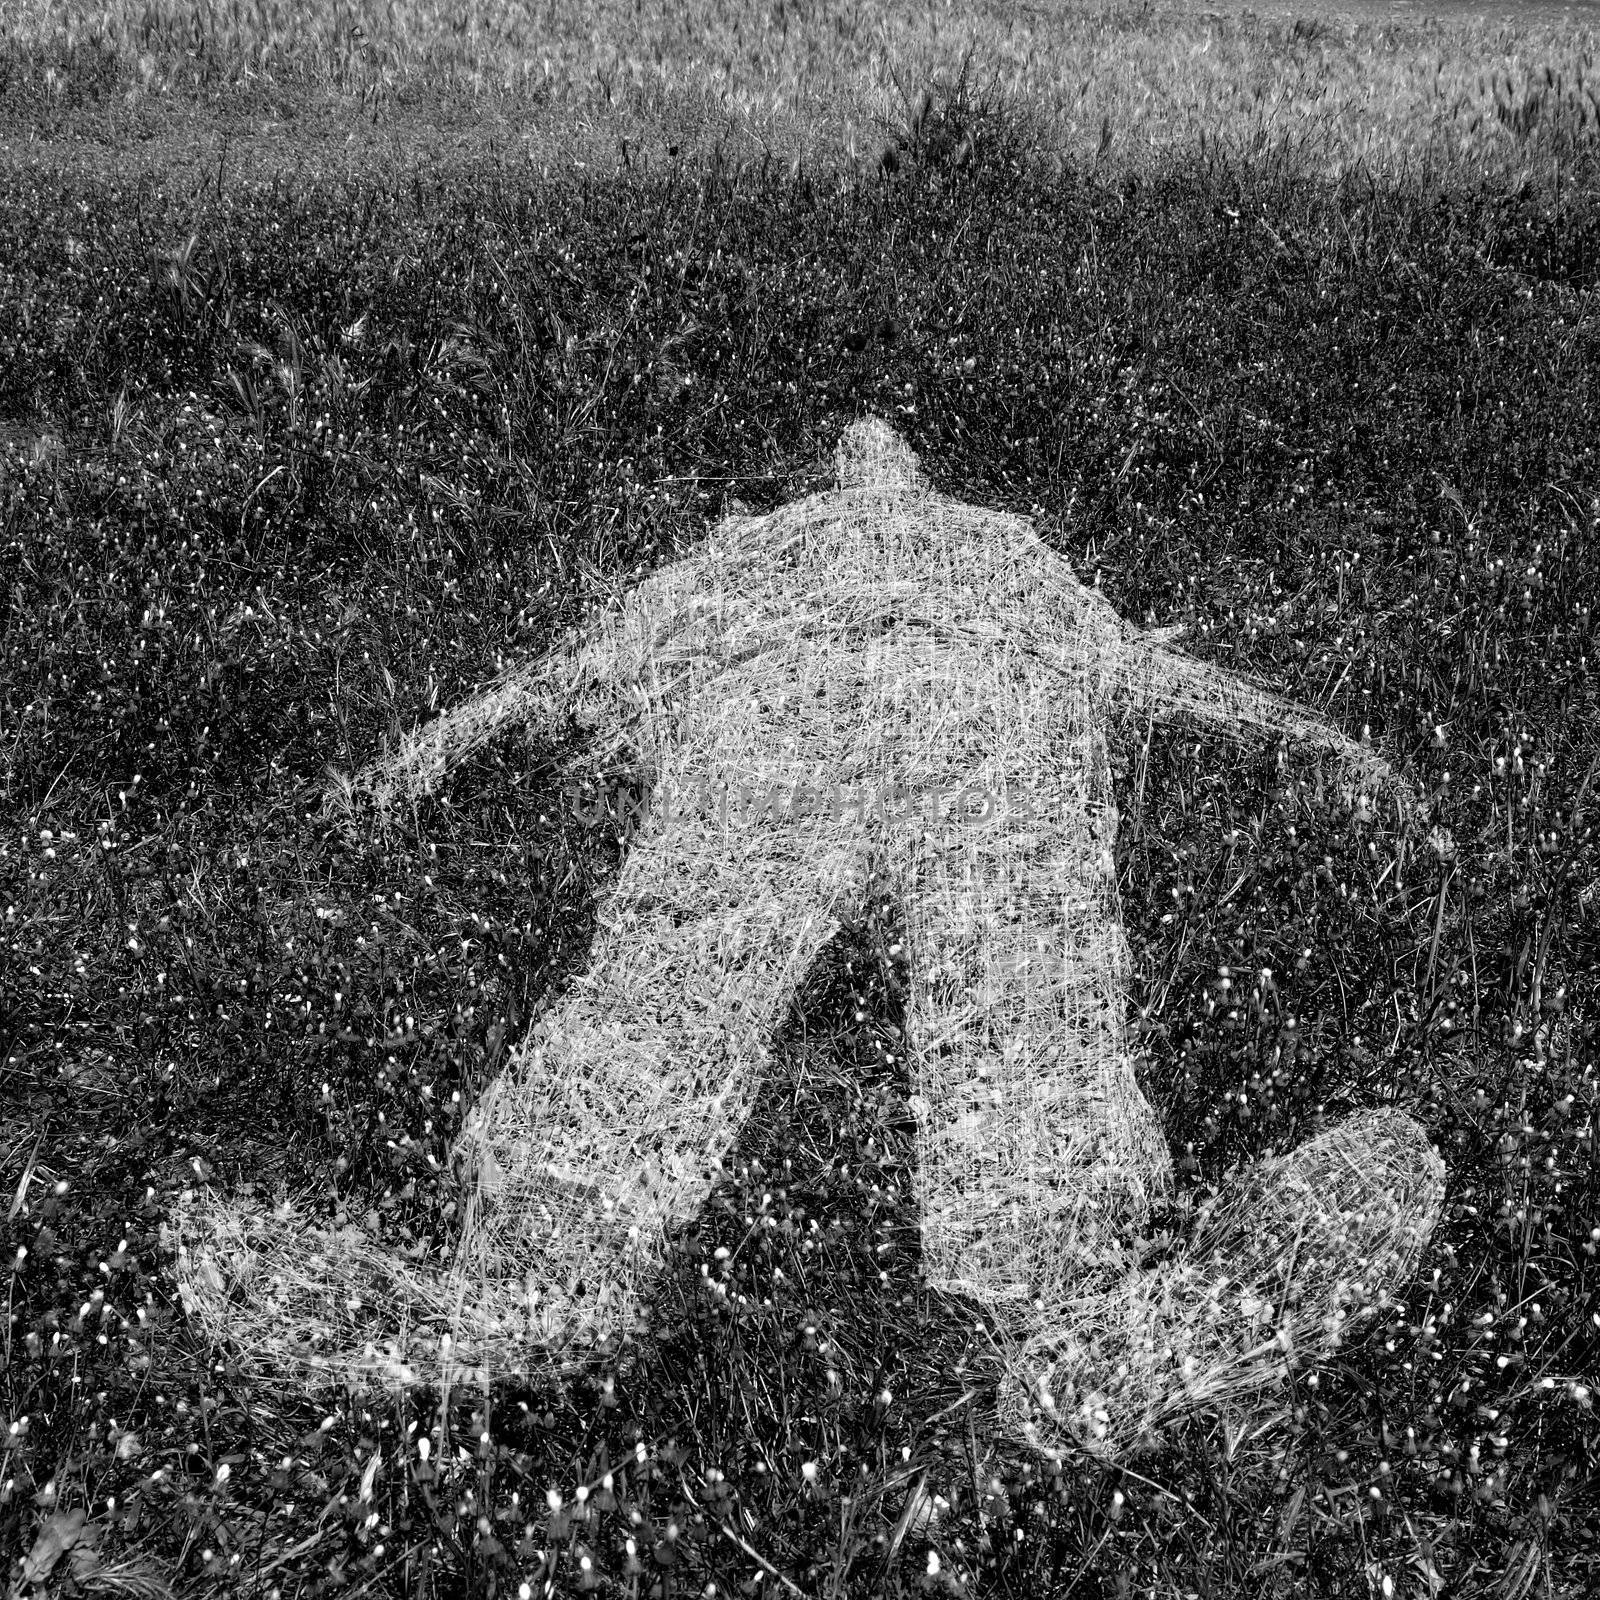 Reclining human figure outline imprinted on grass. Black and white.